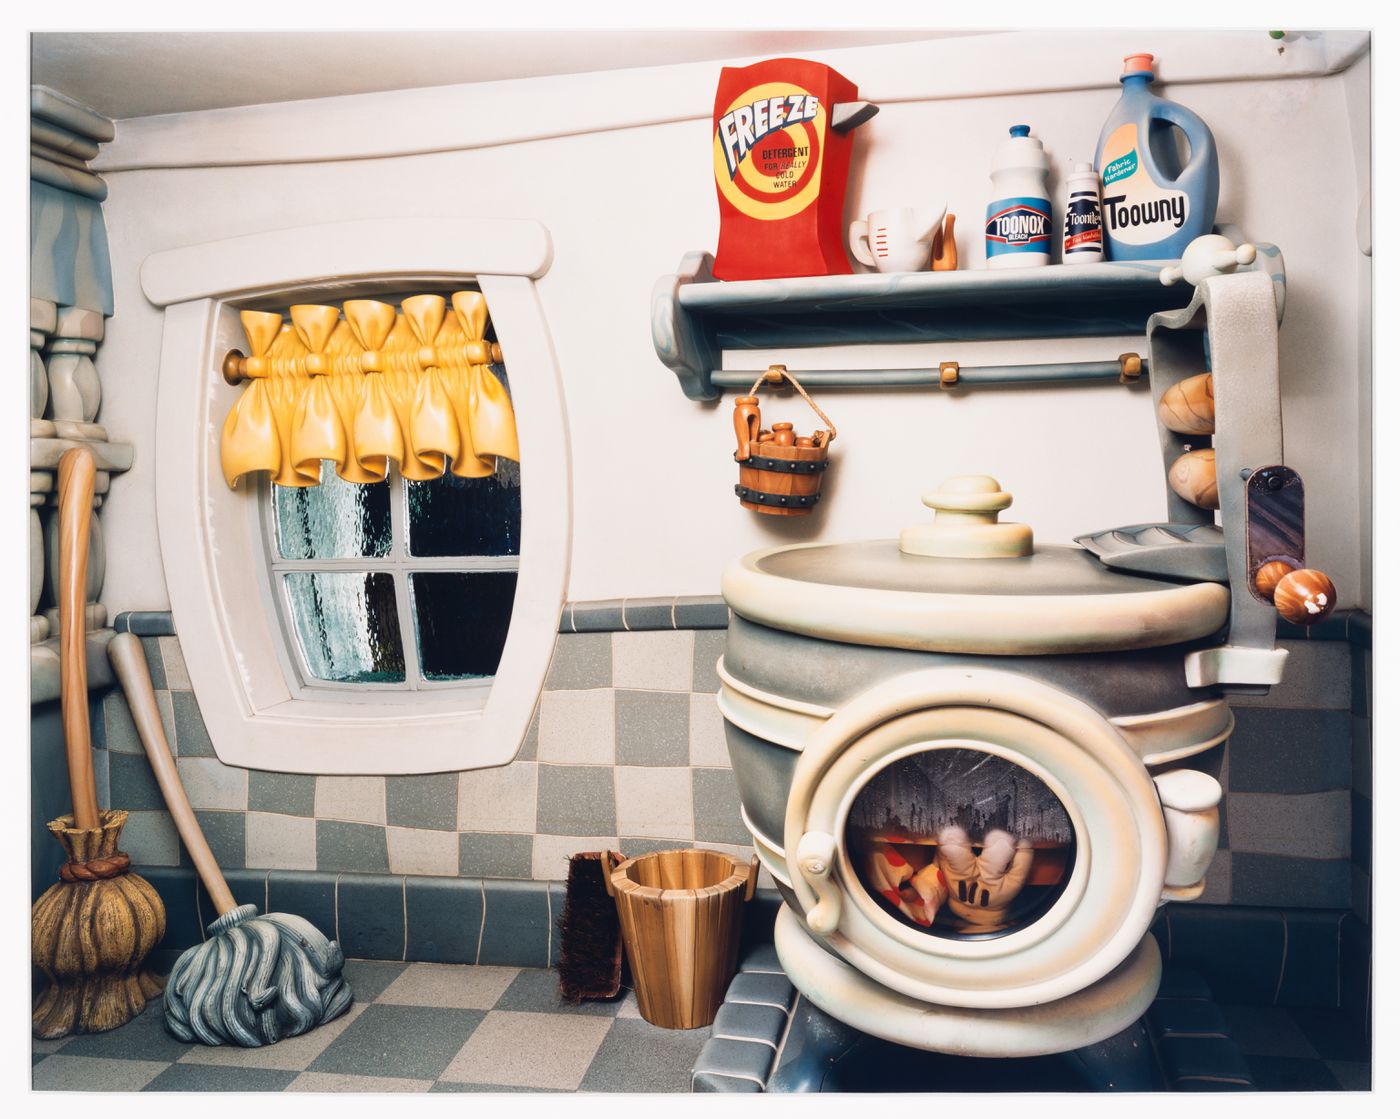 View of Mickey Mouse's laundry room, Mickey's Toontown, Disneyland, Anaheim, California